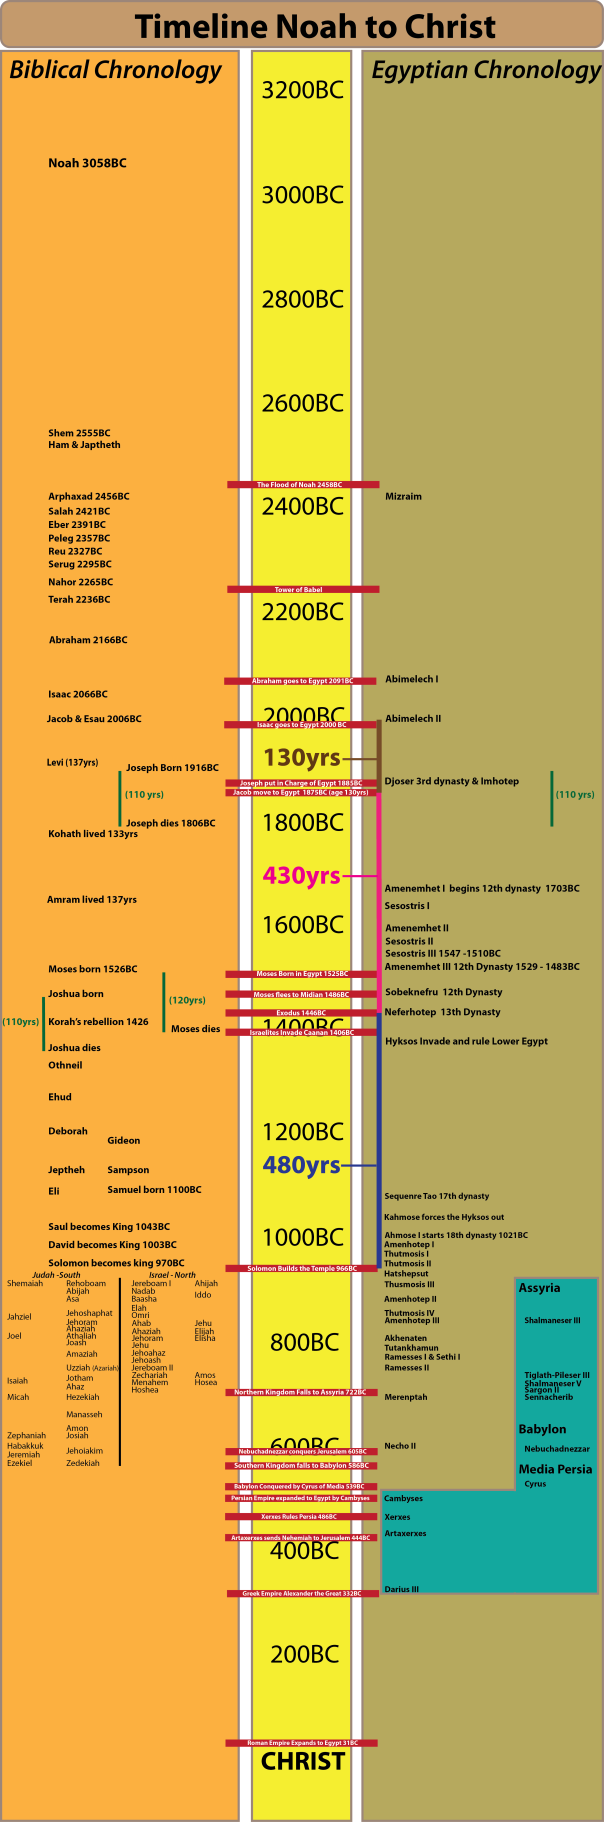 Timeline from Noah to Christ. David Down's revised Egyptian Chronology. Biblical Chronology with a long sojourn.